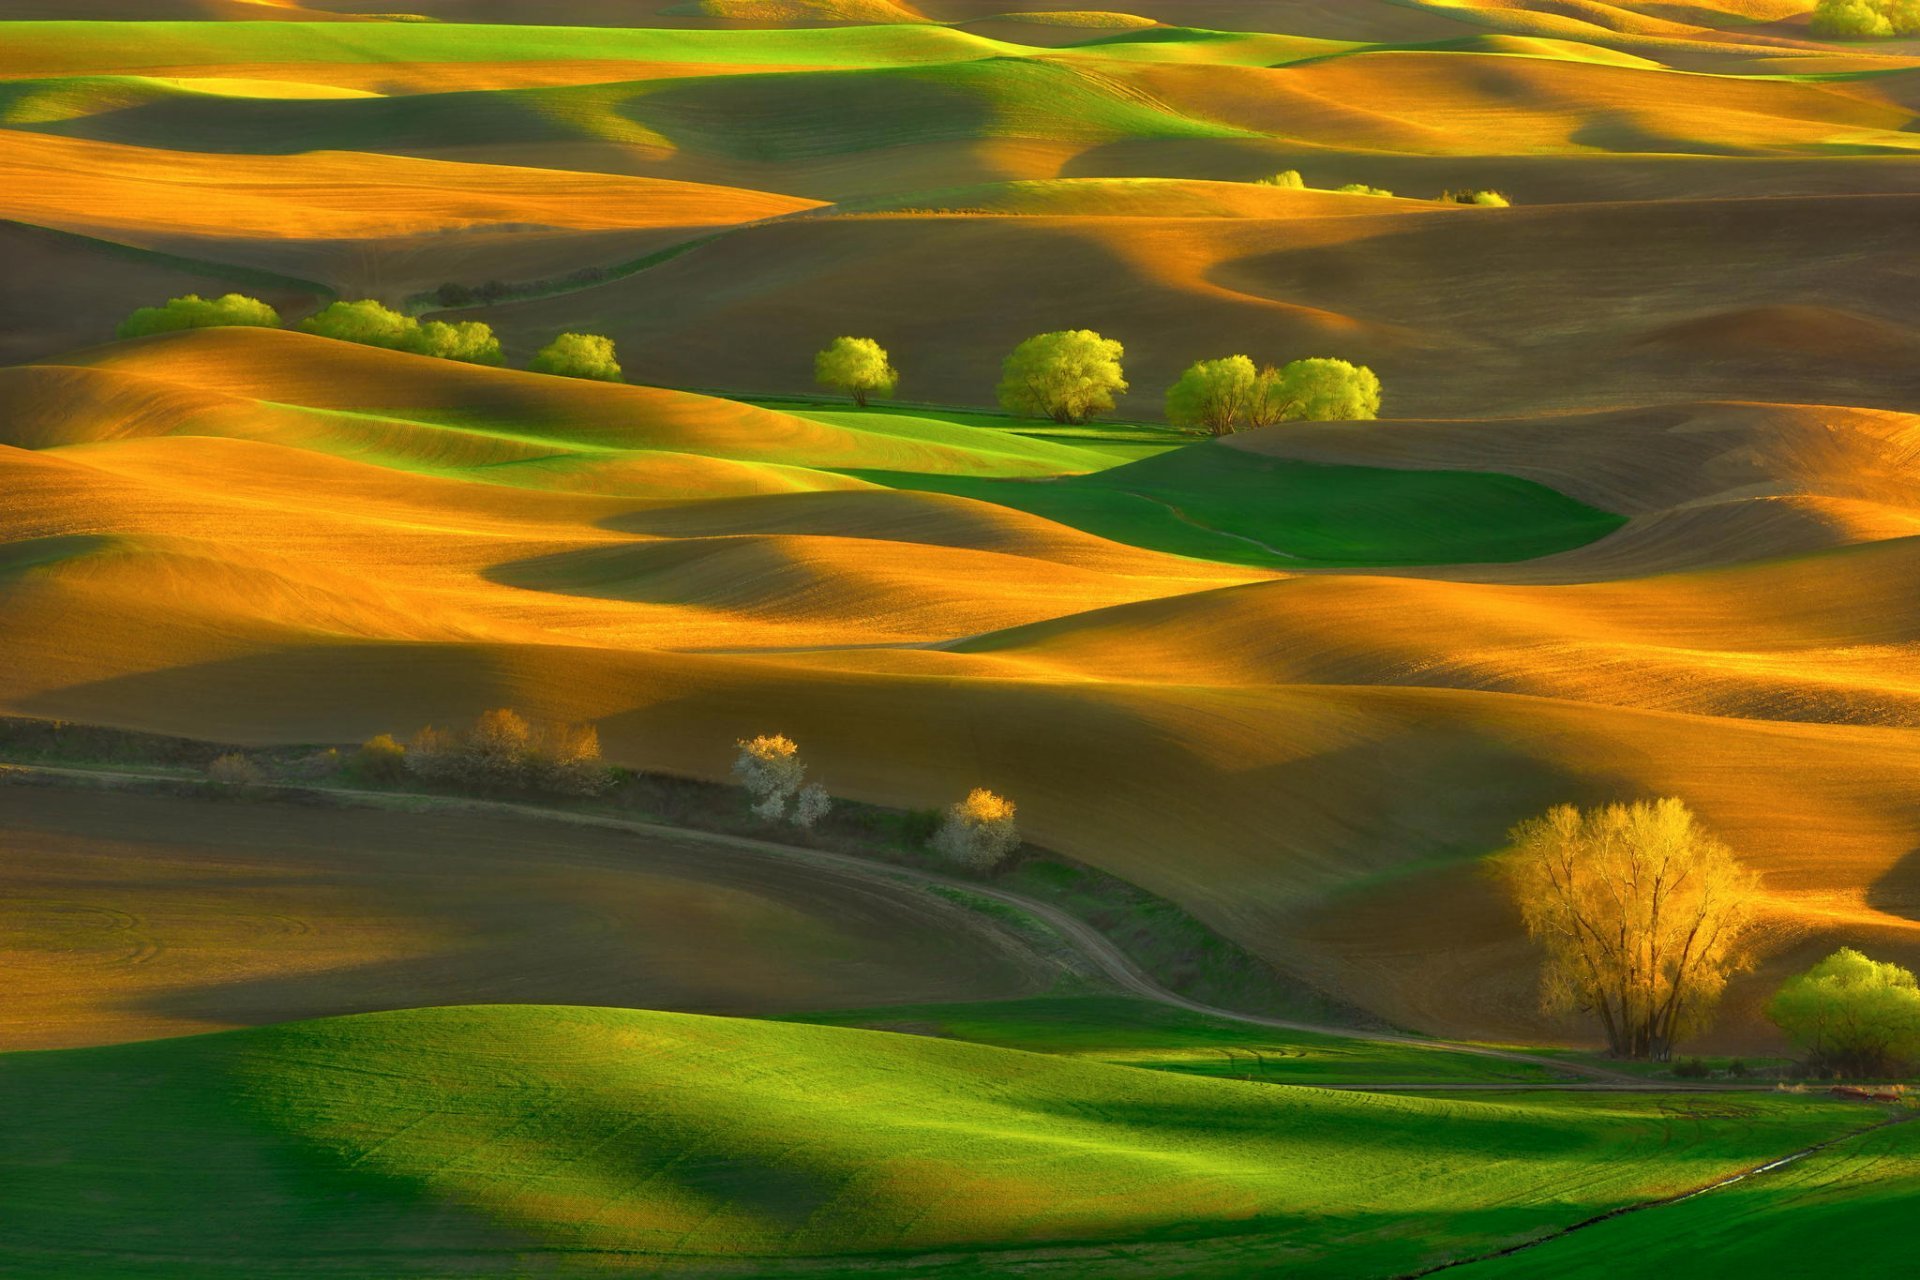 united-states-state-washington-steptoe-butte-state-park-spring-may-hills-tree-of-the-field-rugs.jpg